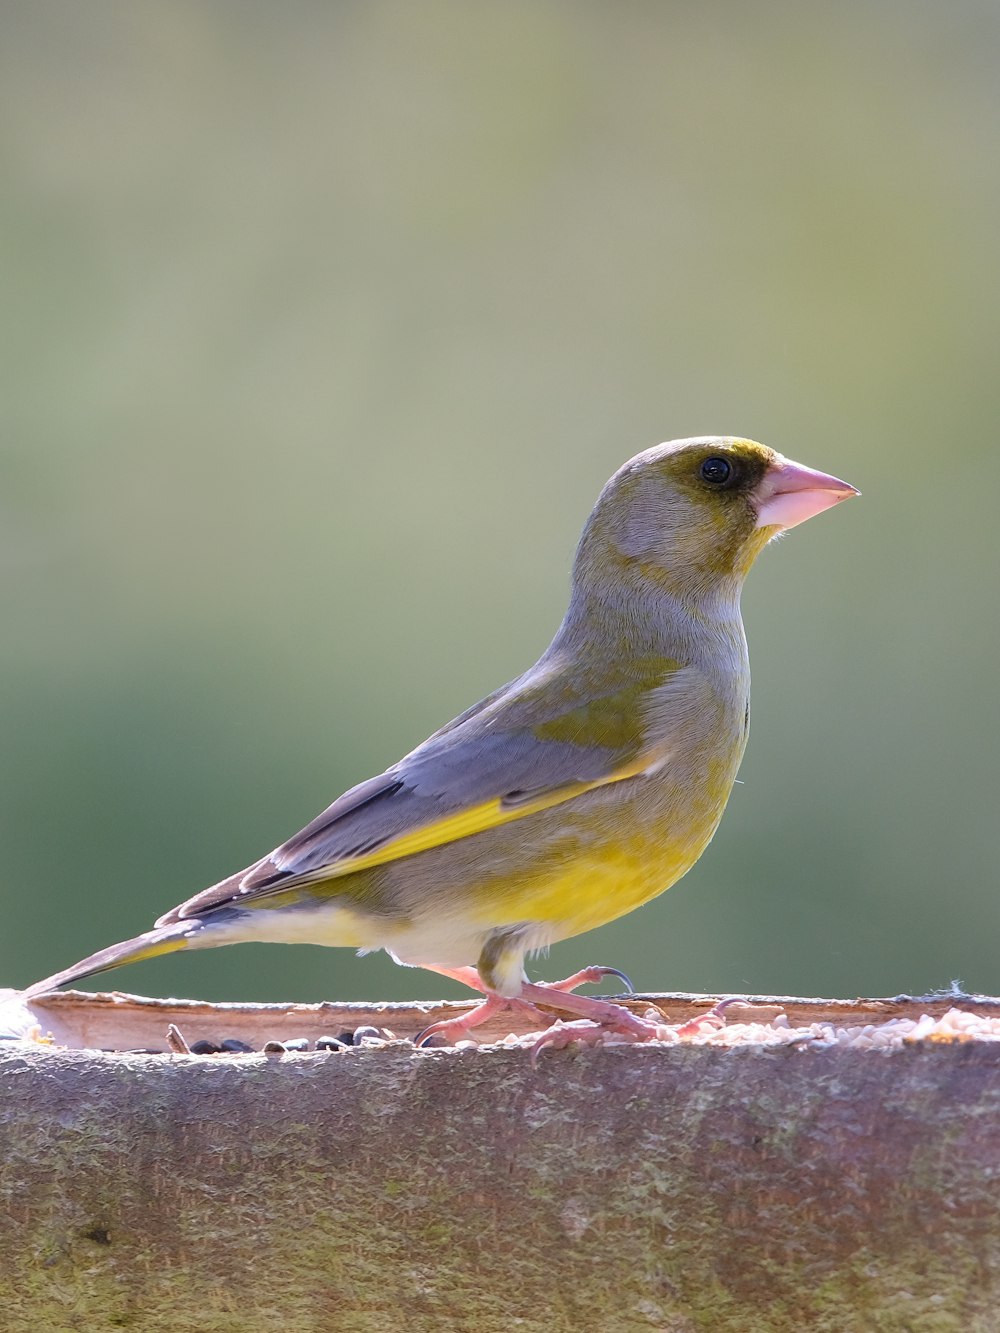 a yellow and gray bird sitting on a wooden ledge